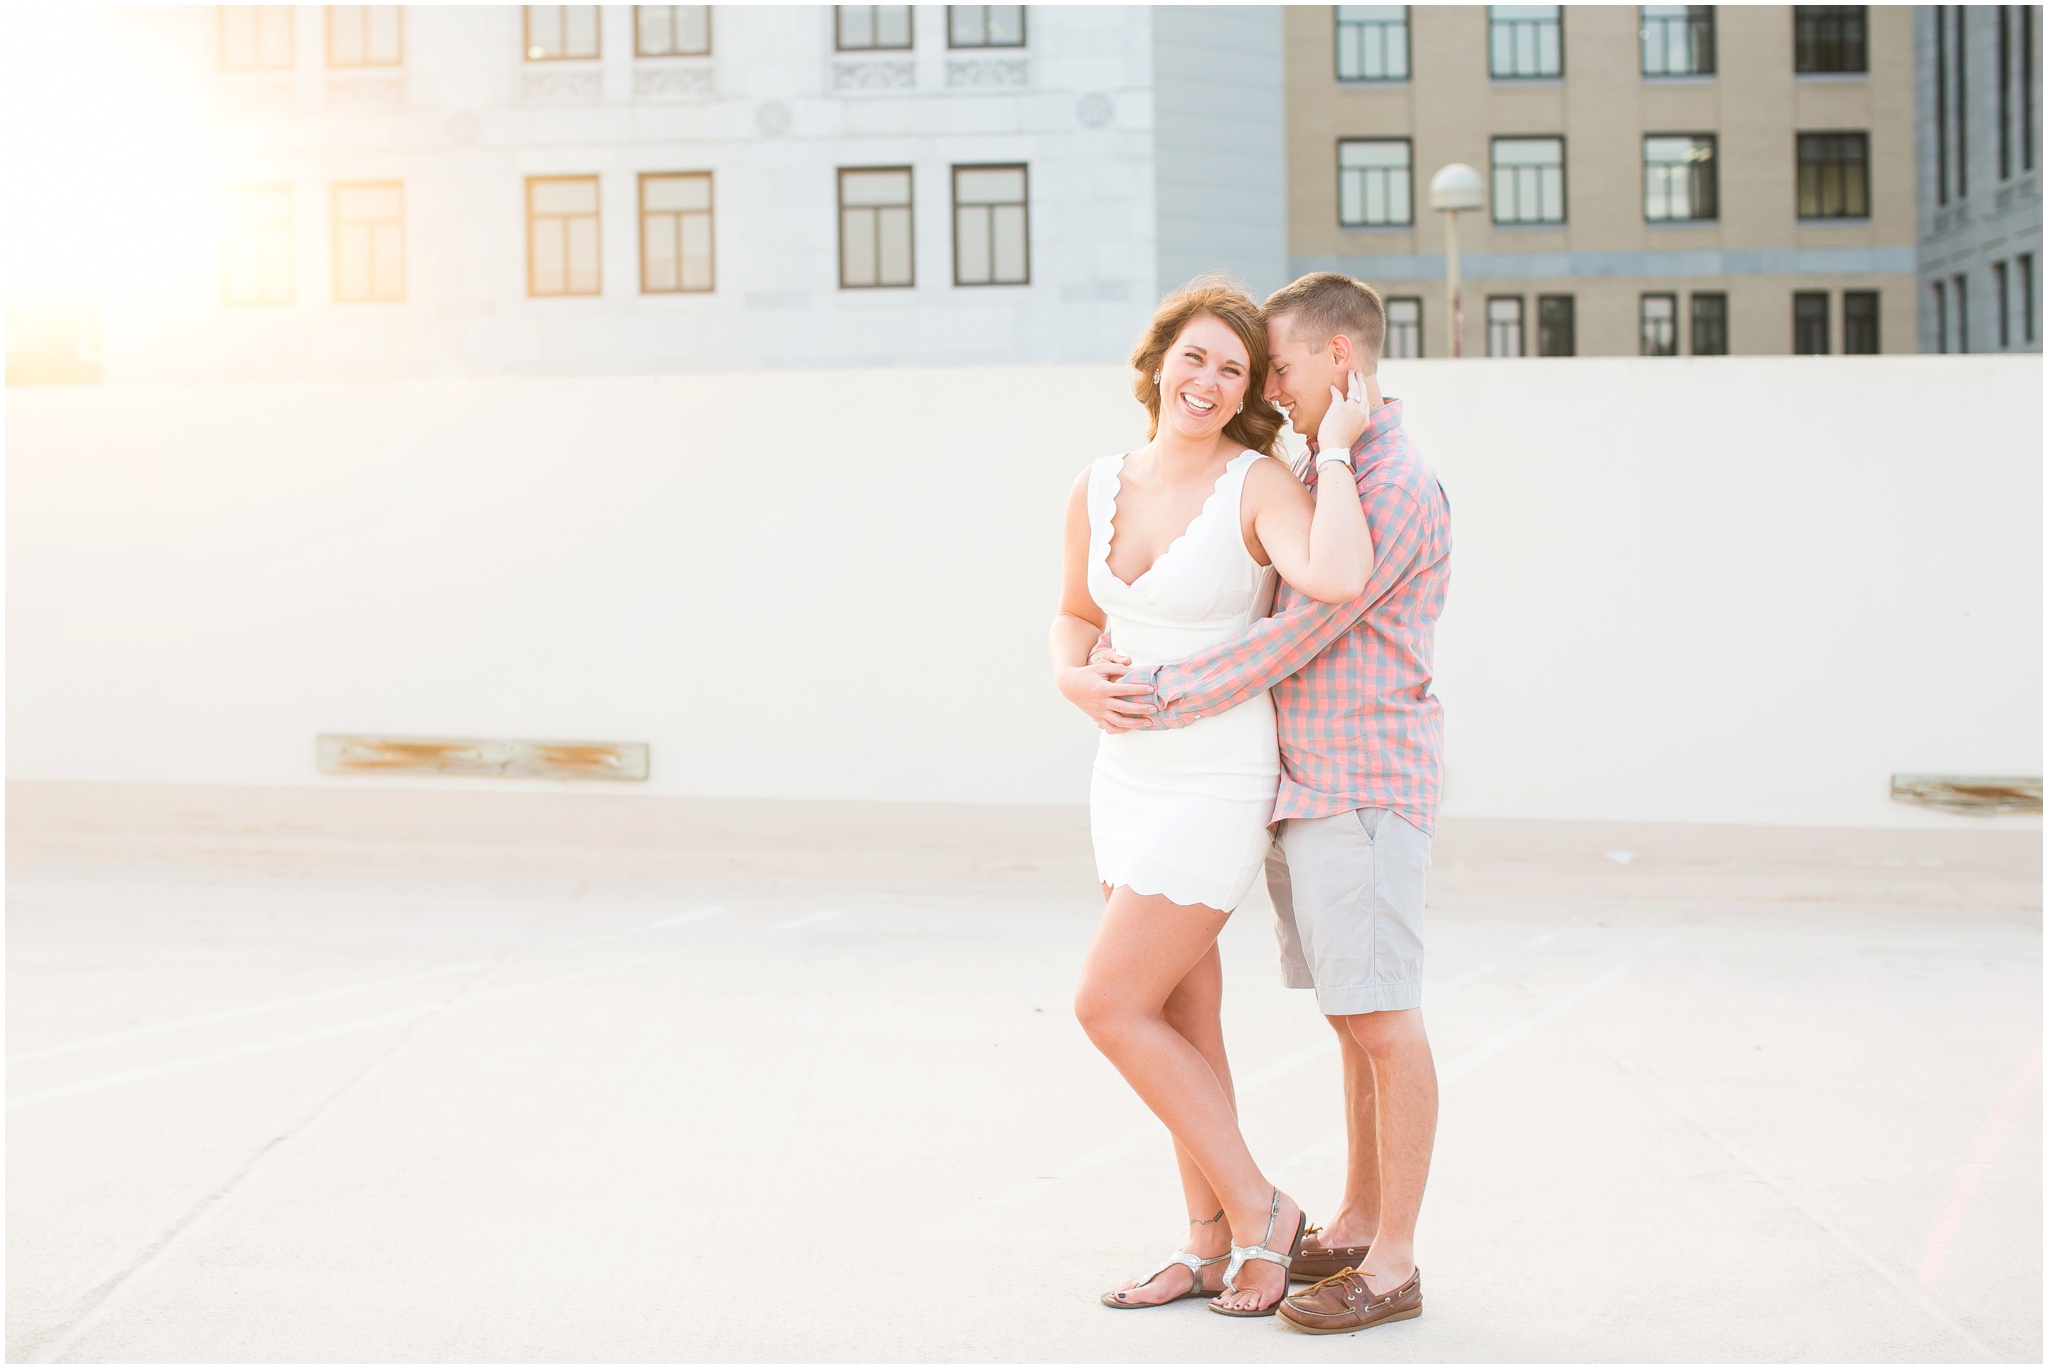 Downtown_Madison_Wisconsin_Engagement_Session_Waterfront_Monona_Terrace_0474.jpg